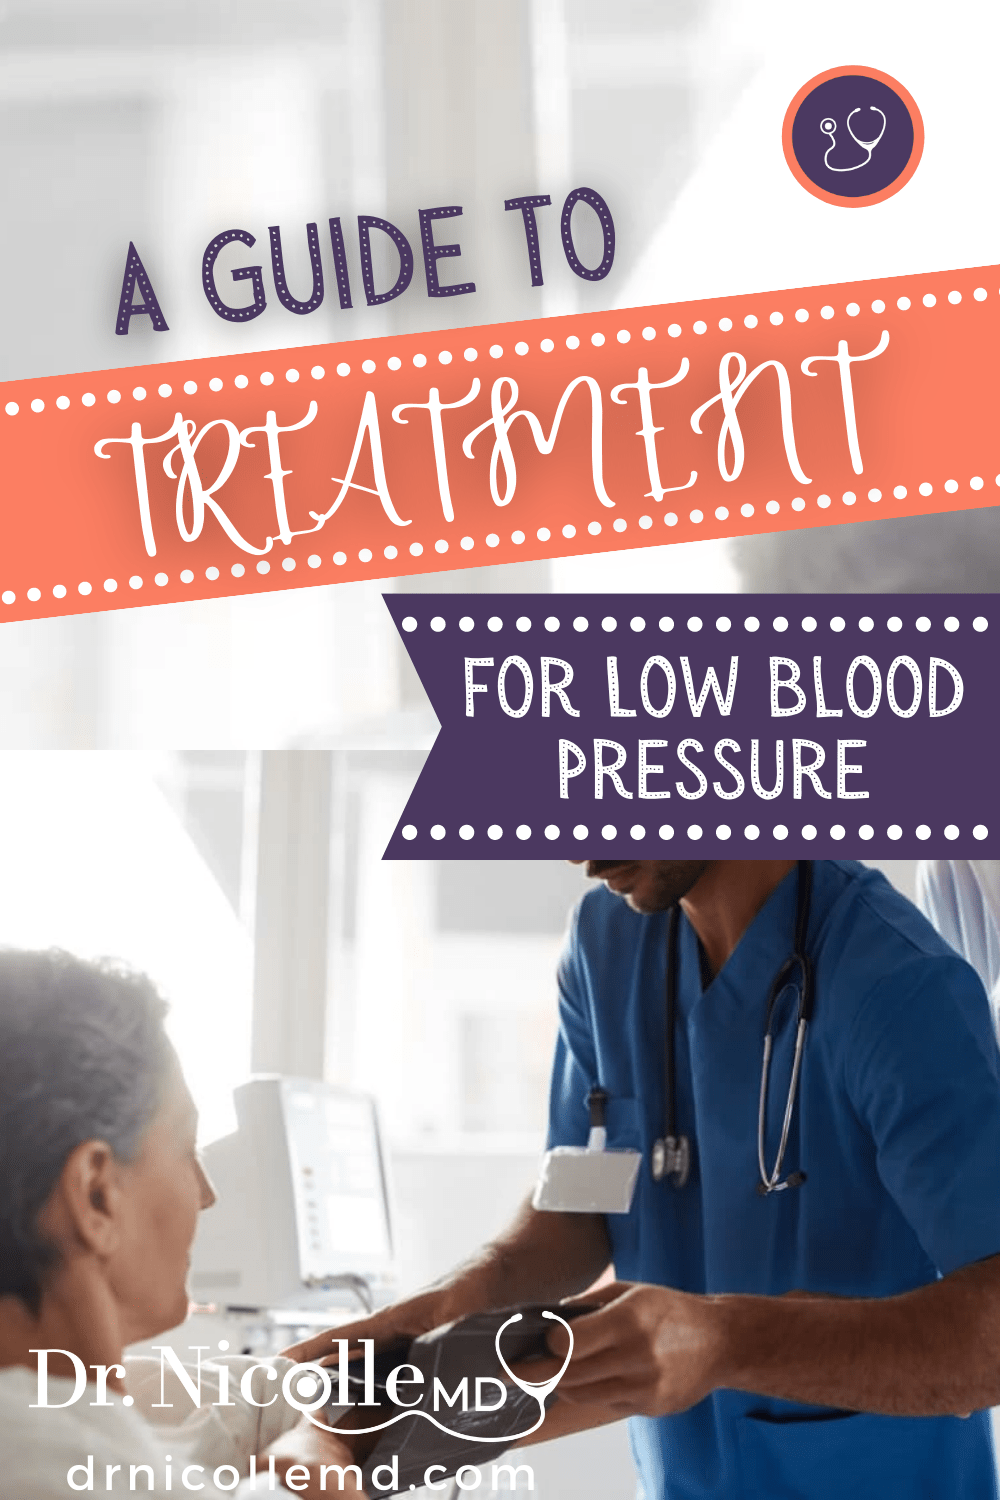 A Guide to Treatment for Low Blood Pressure